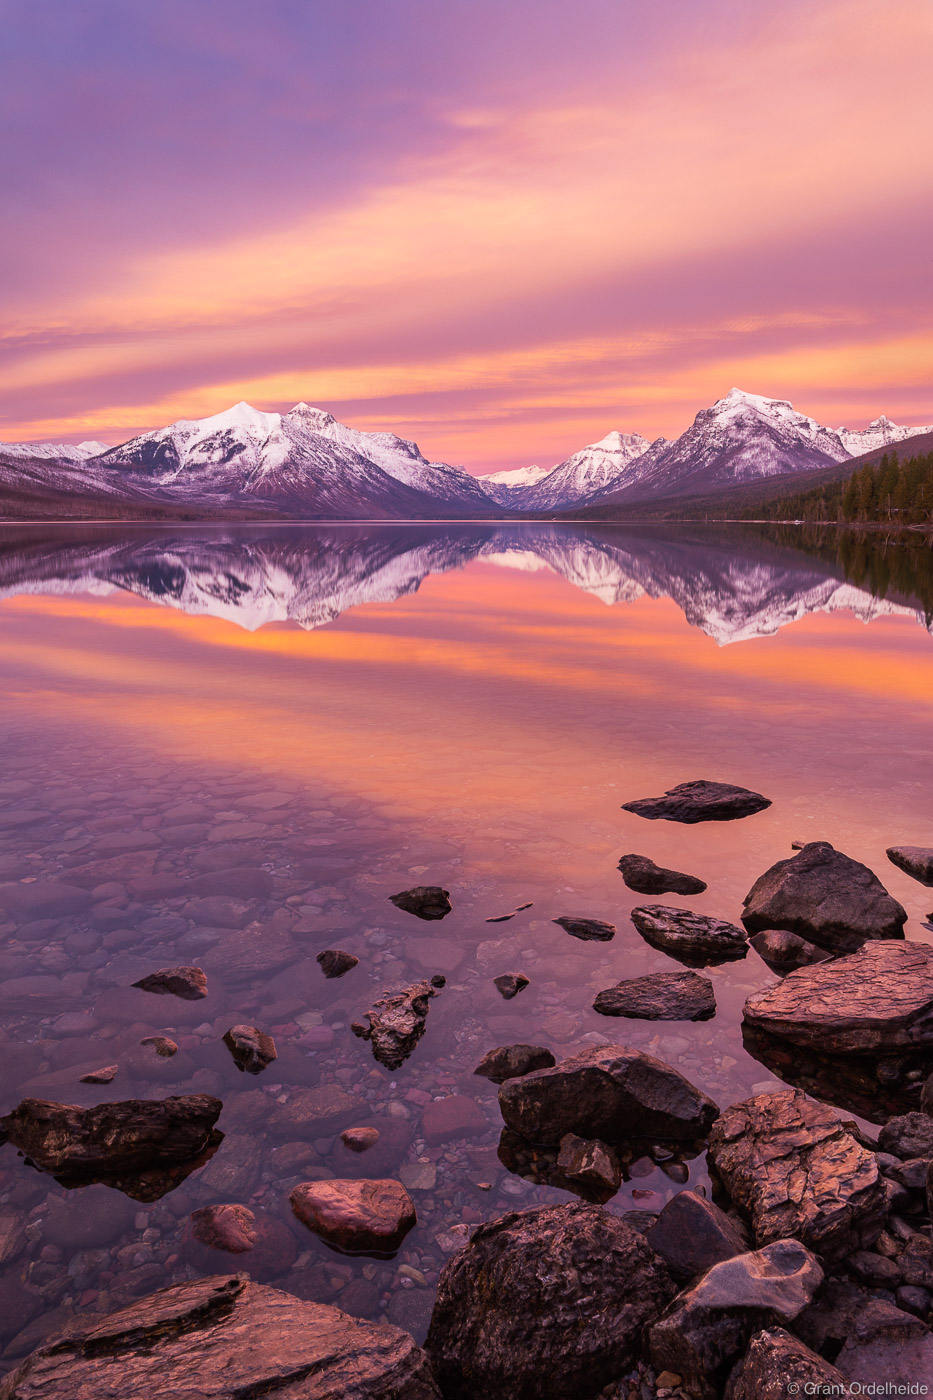 A fiery sunset over Lake McDonald in Montana's Glacier National Park.